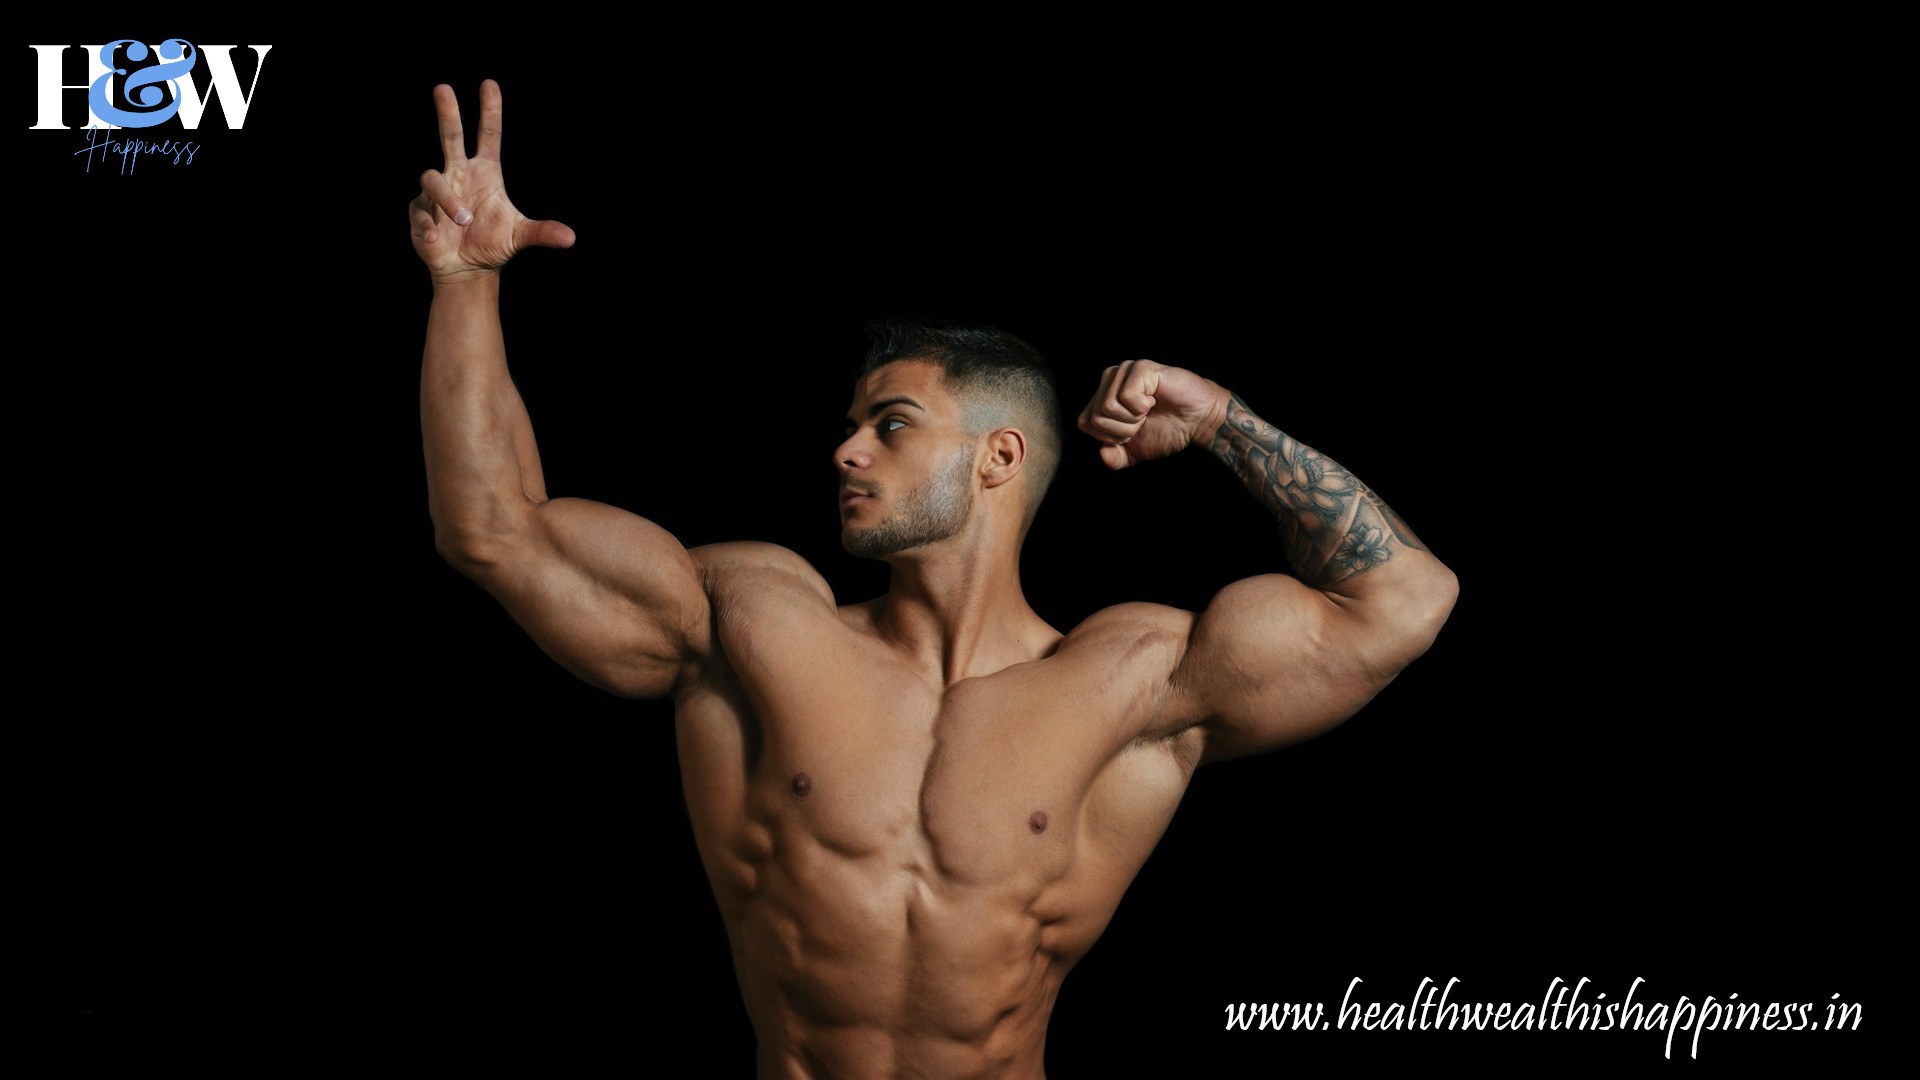 Individual showcasing a strong biceps pose, muscles flexed and defined. Demonstrating power and fitness through a confident arm